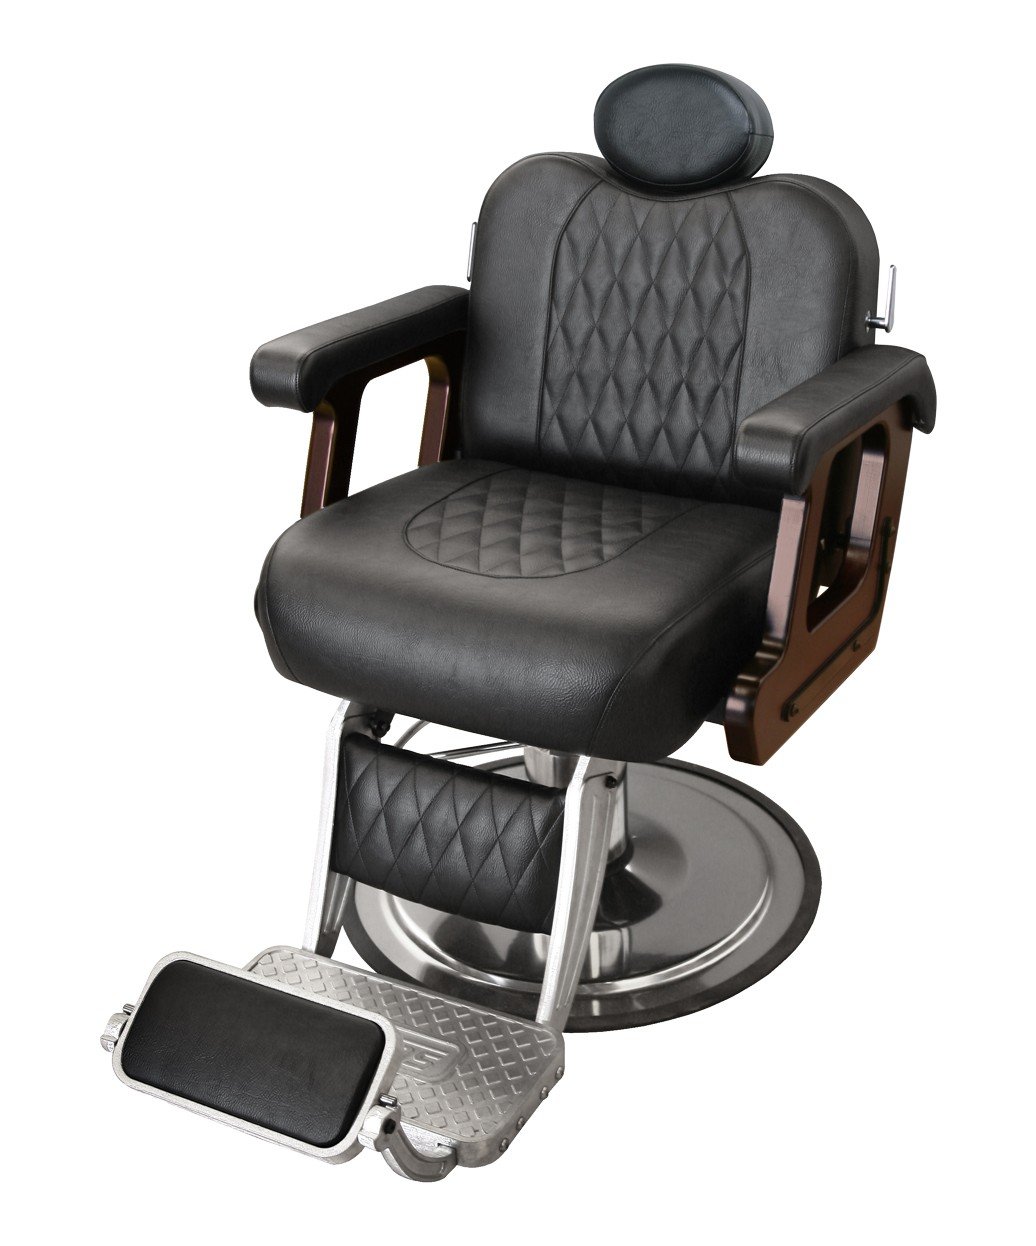 Collins B60 Commander Supreme Barber Chair with Calf Pad Leg Rest